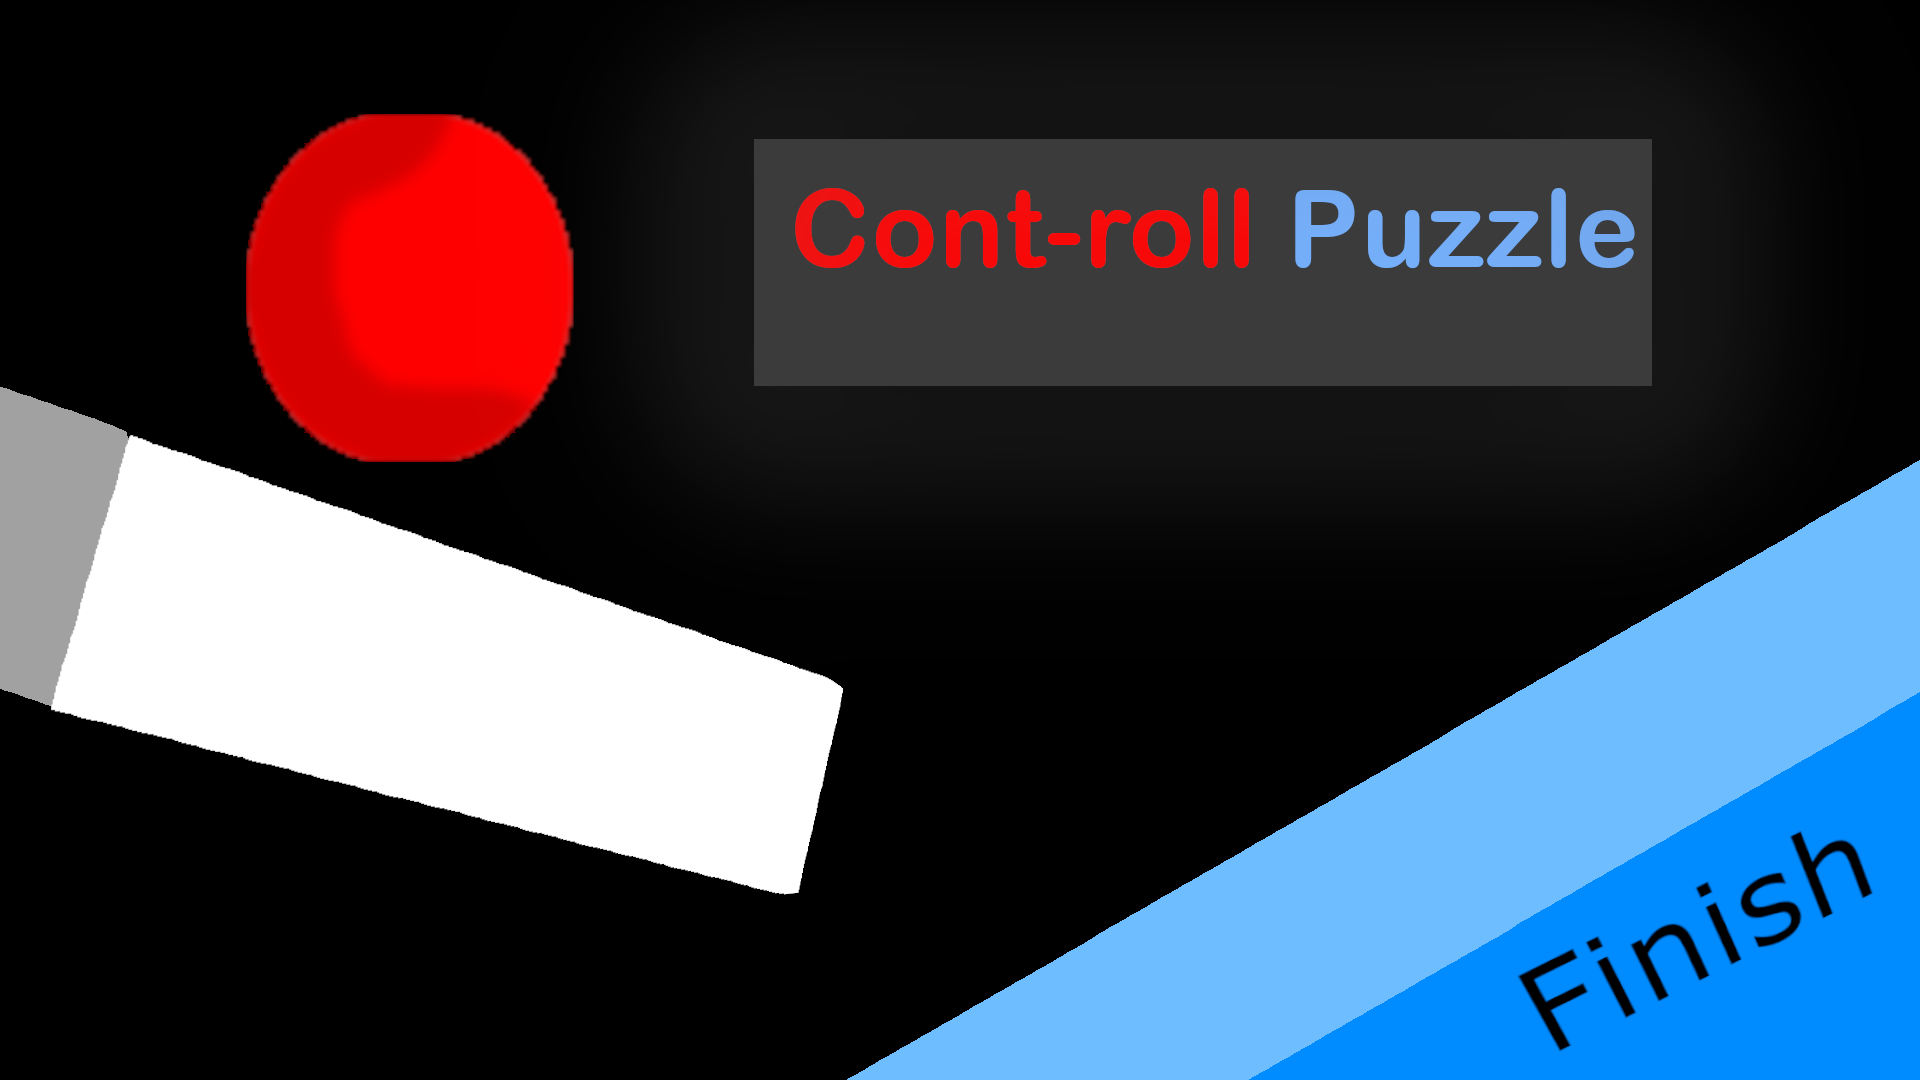 Cont-roll Puzzle